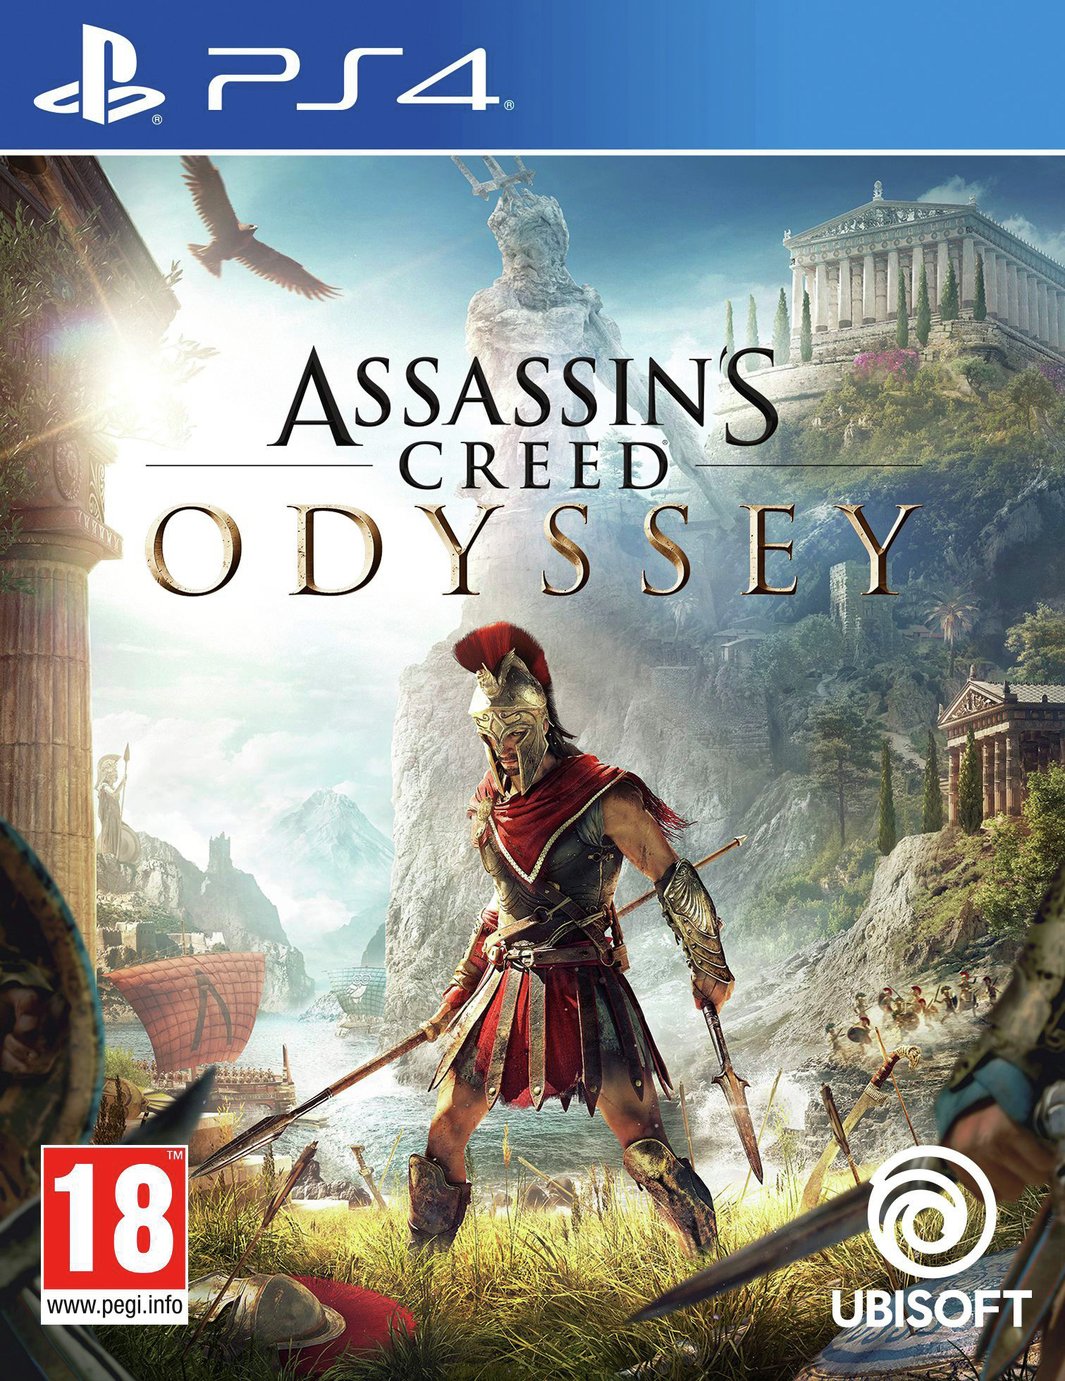 Assassin's Creed Odyssey PS4 Game Review